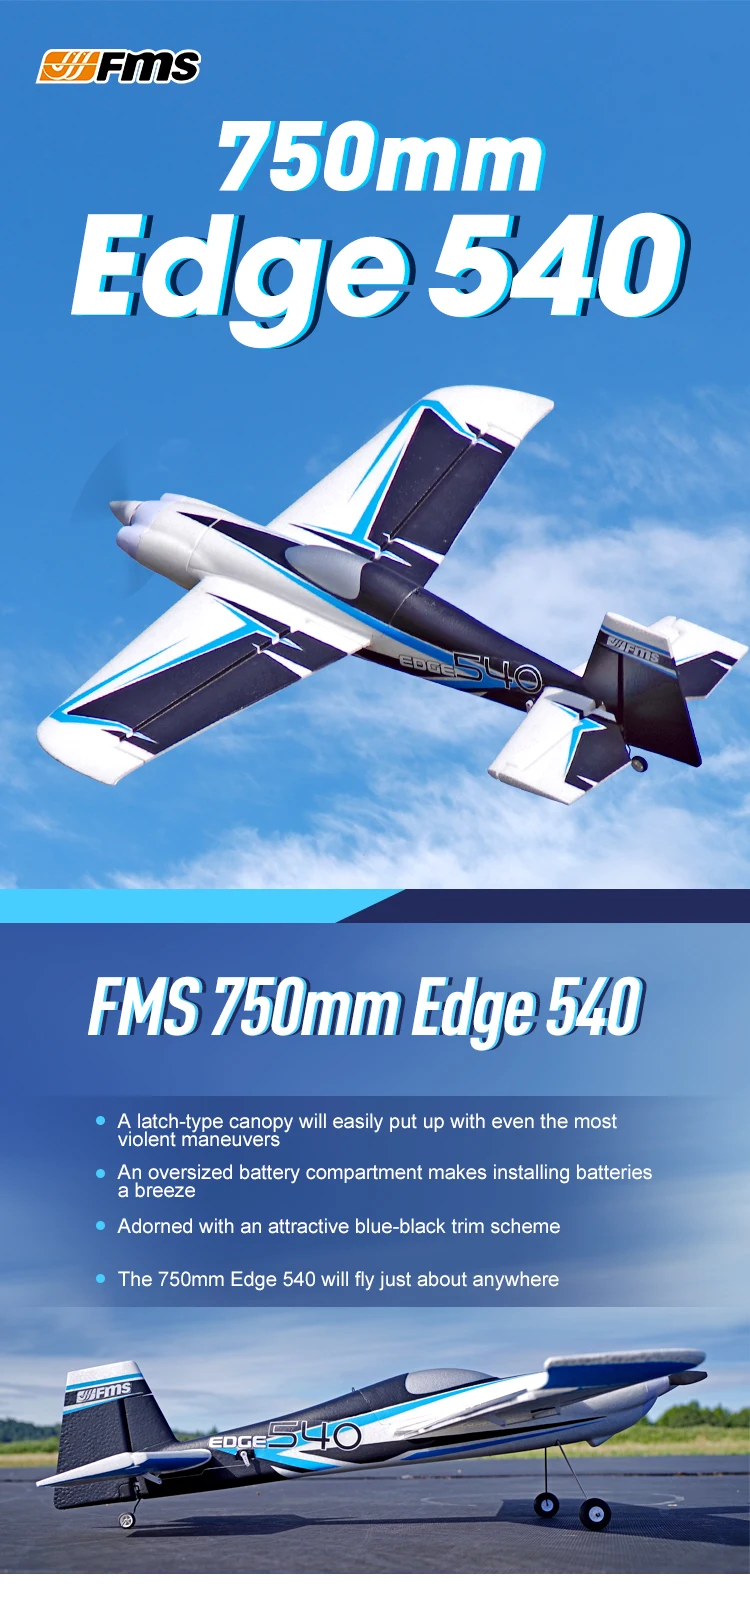 Fms Rc Airplane Plane 750mm Edge 540 Park Flyer 3d Acrobatic Sport Indoor  With Reflex Gyro Auto Balance Pnp Model Hobby Aircraft - Rc Airplanes -  AliExpress